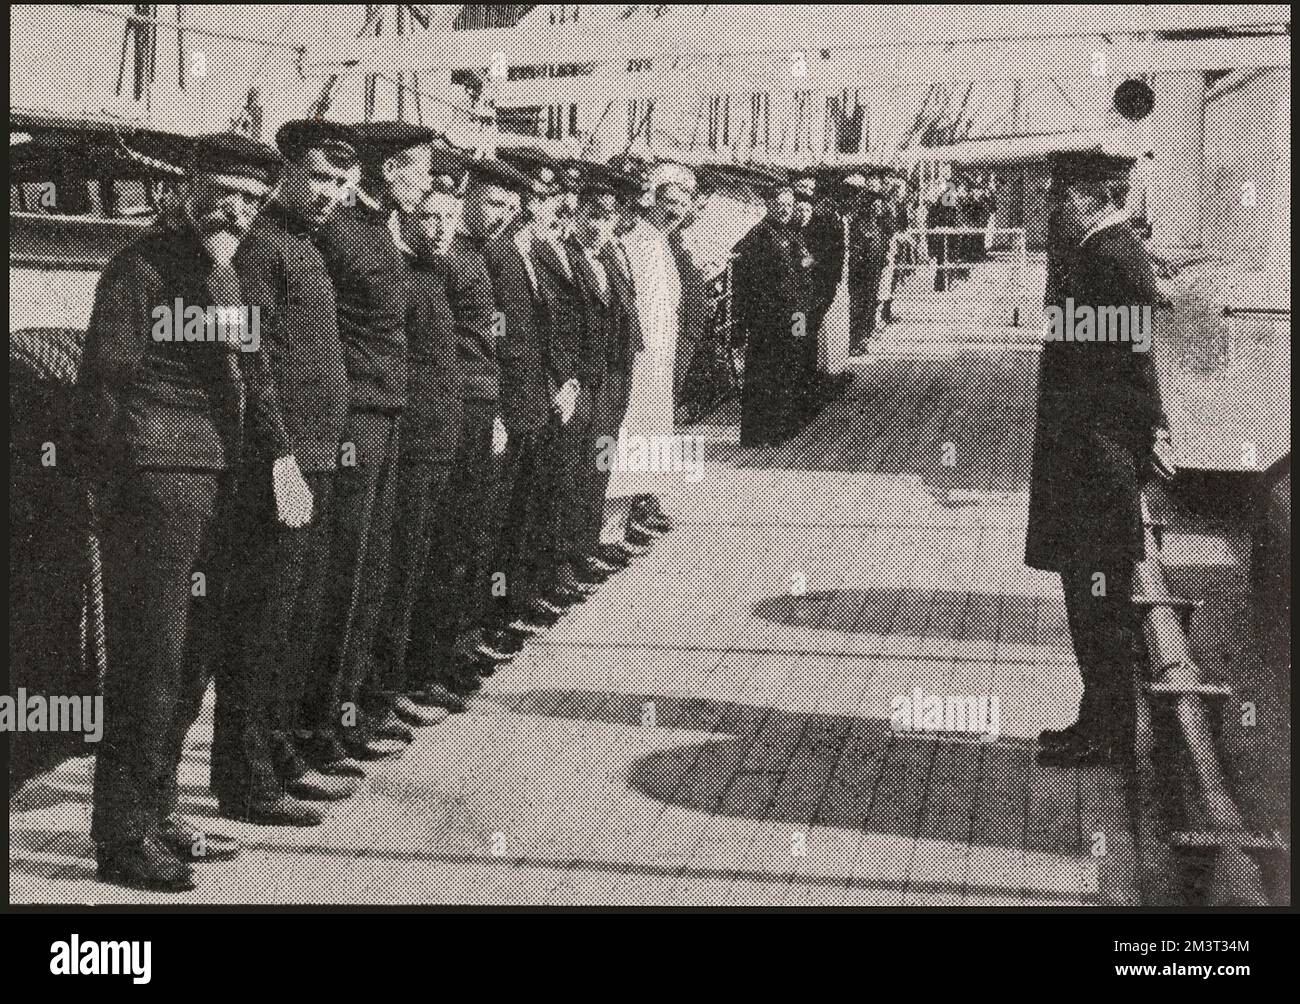 The Crew of The RMS Titanic at boat drill prior to the ill-fated maiden voyage of the White Star Line Steamship, which sunk after striking an iceberg in the North Atlantic Ocean on 15 April,1912. Stock Photo